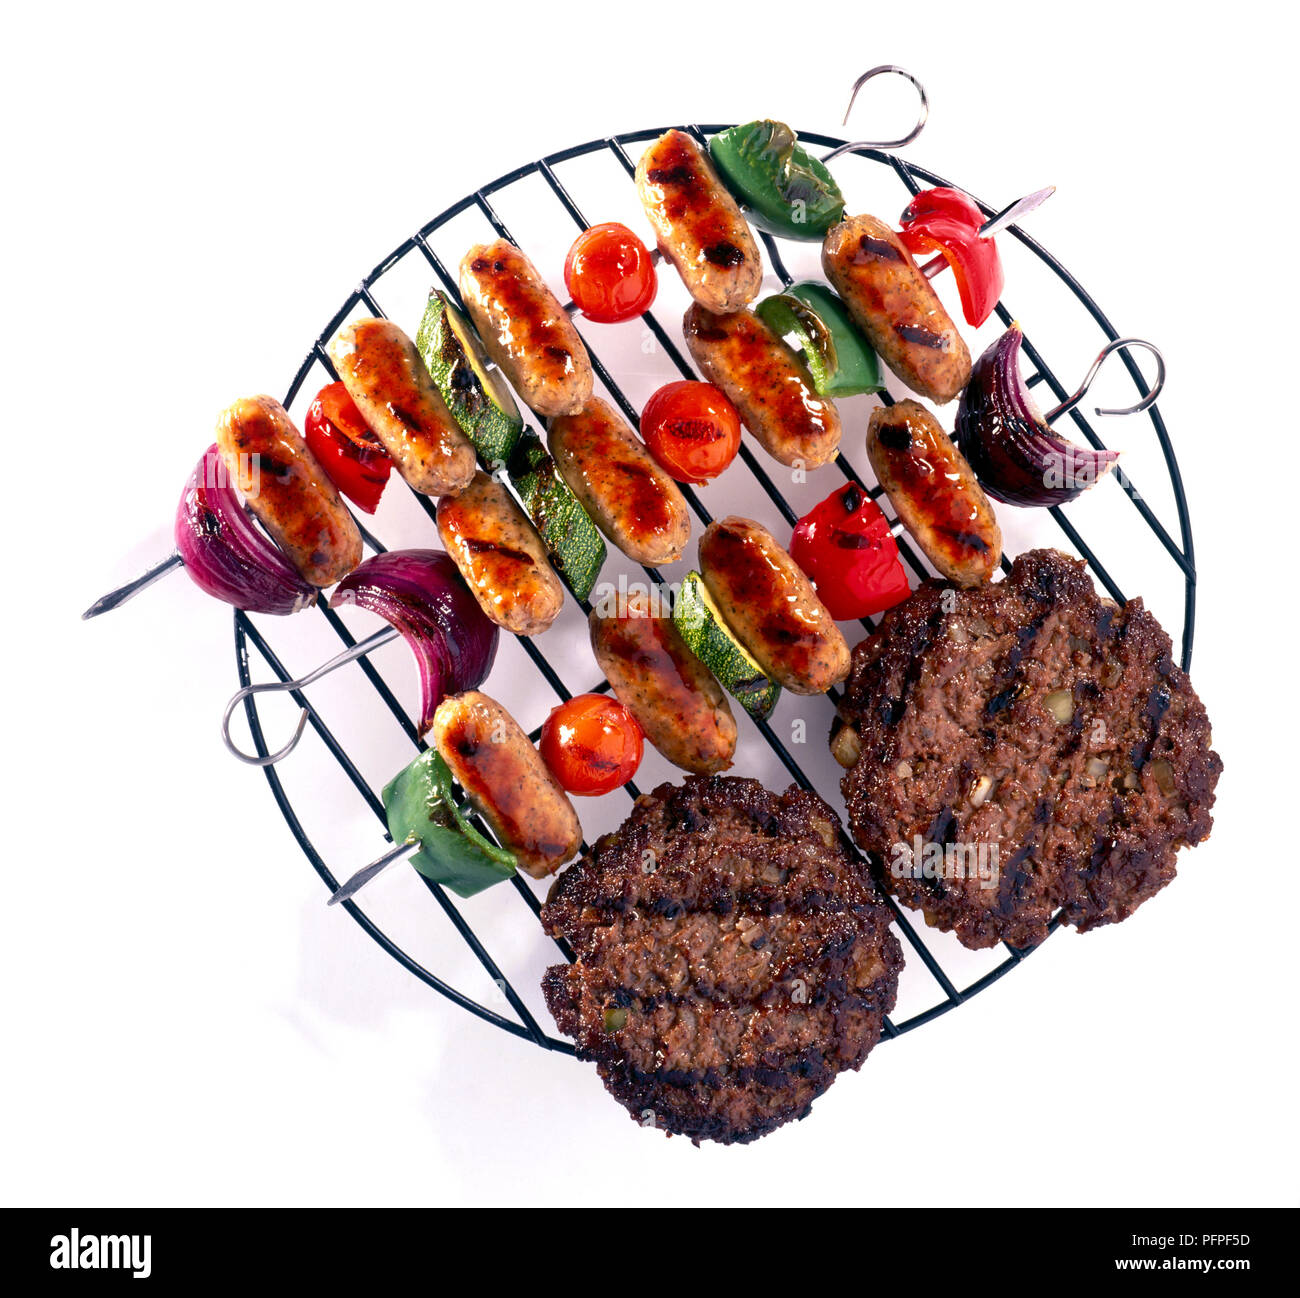 Two grilled beef burgers and sliced vegetables and cocktail sausages on skewers on wire wrack Stock Photo